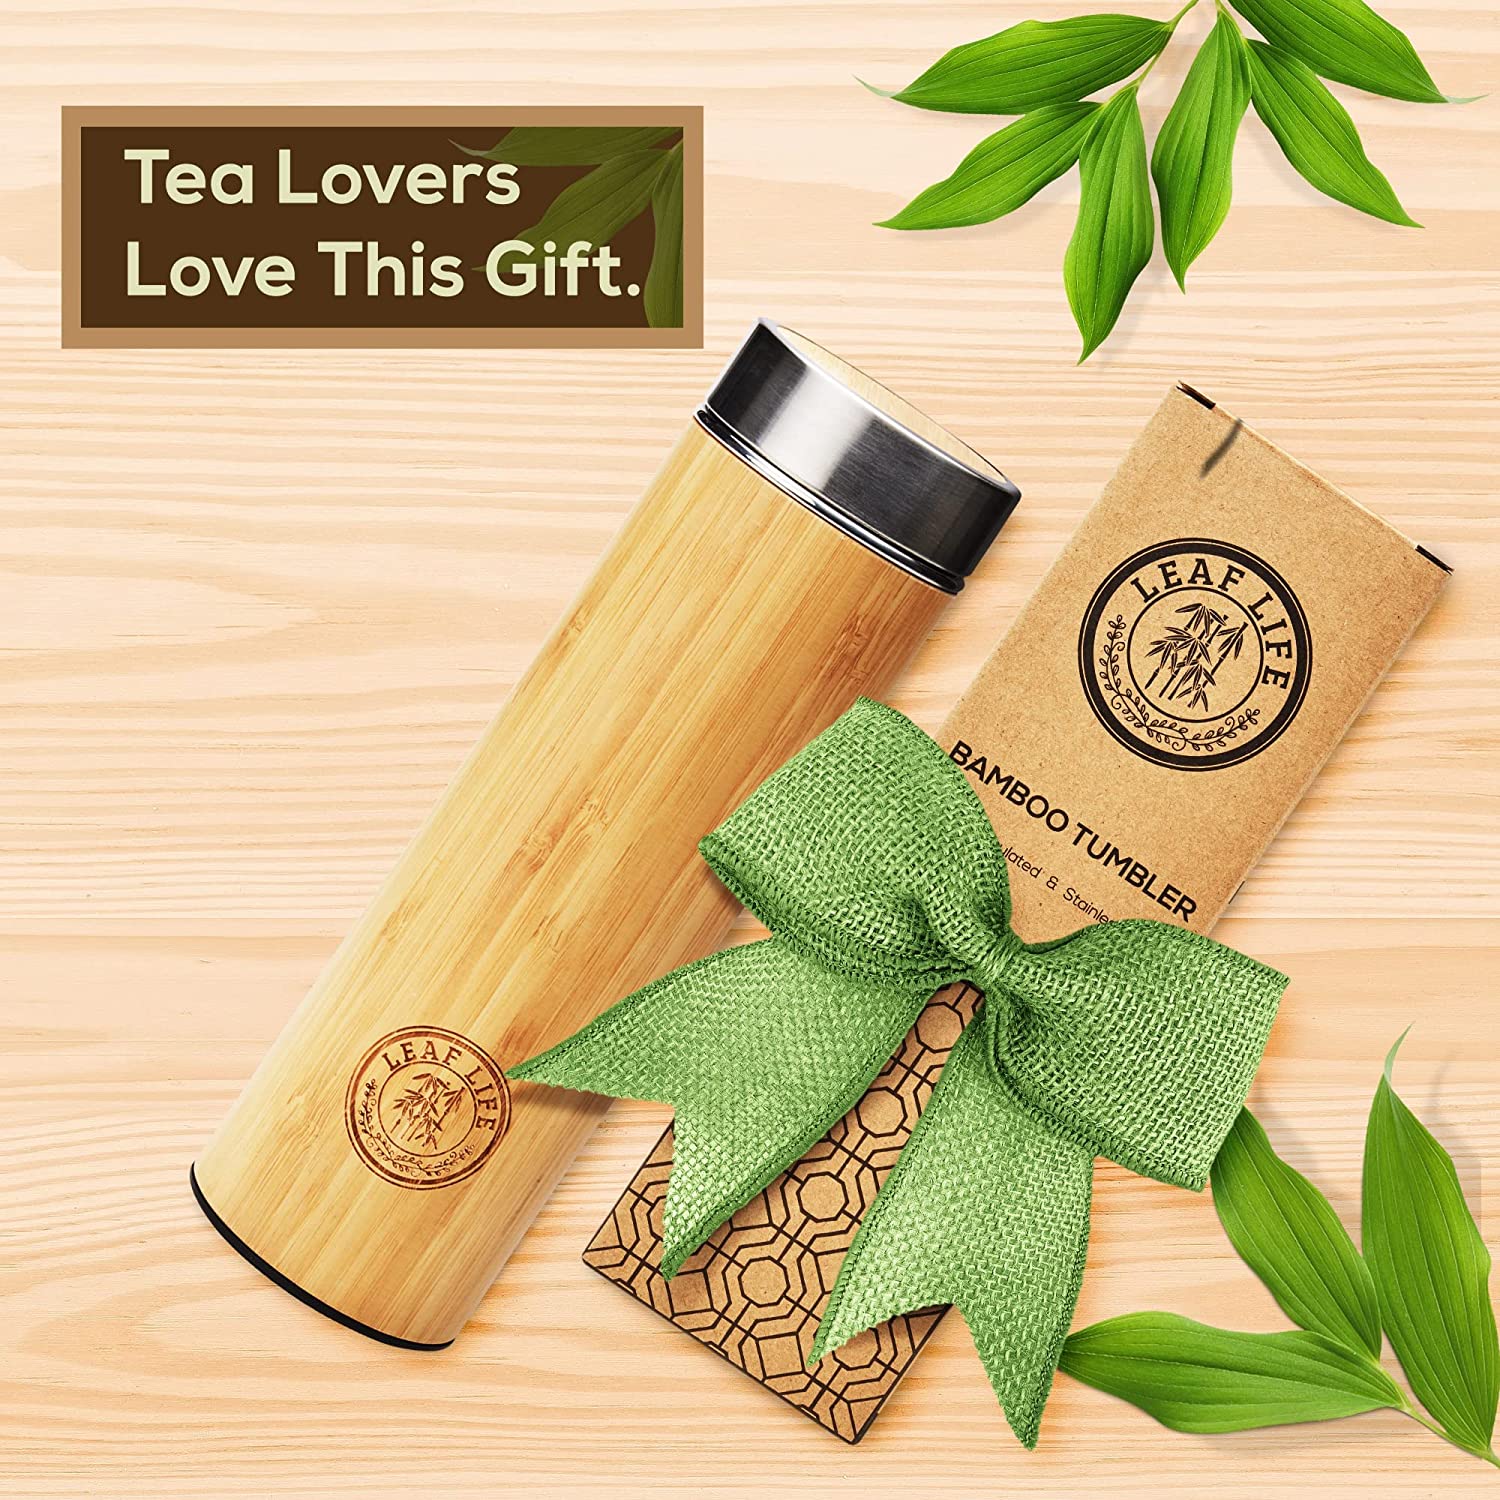 LeafLife Premium Bamboo Thermos with Tea Infuser & Strainer 17oz capacity - Keeps Hot & Cold for 12 Hrs - Vacuum Insulated Stainless Steel Travel Tea Tumbler Infuser Bottle for Loose Leaf Tea & Coffee - image 2 of 9